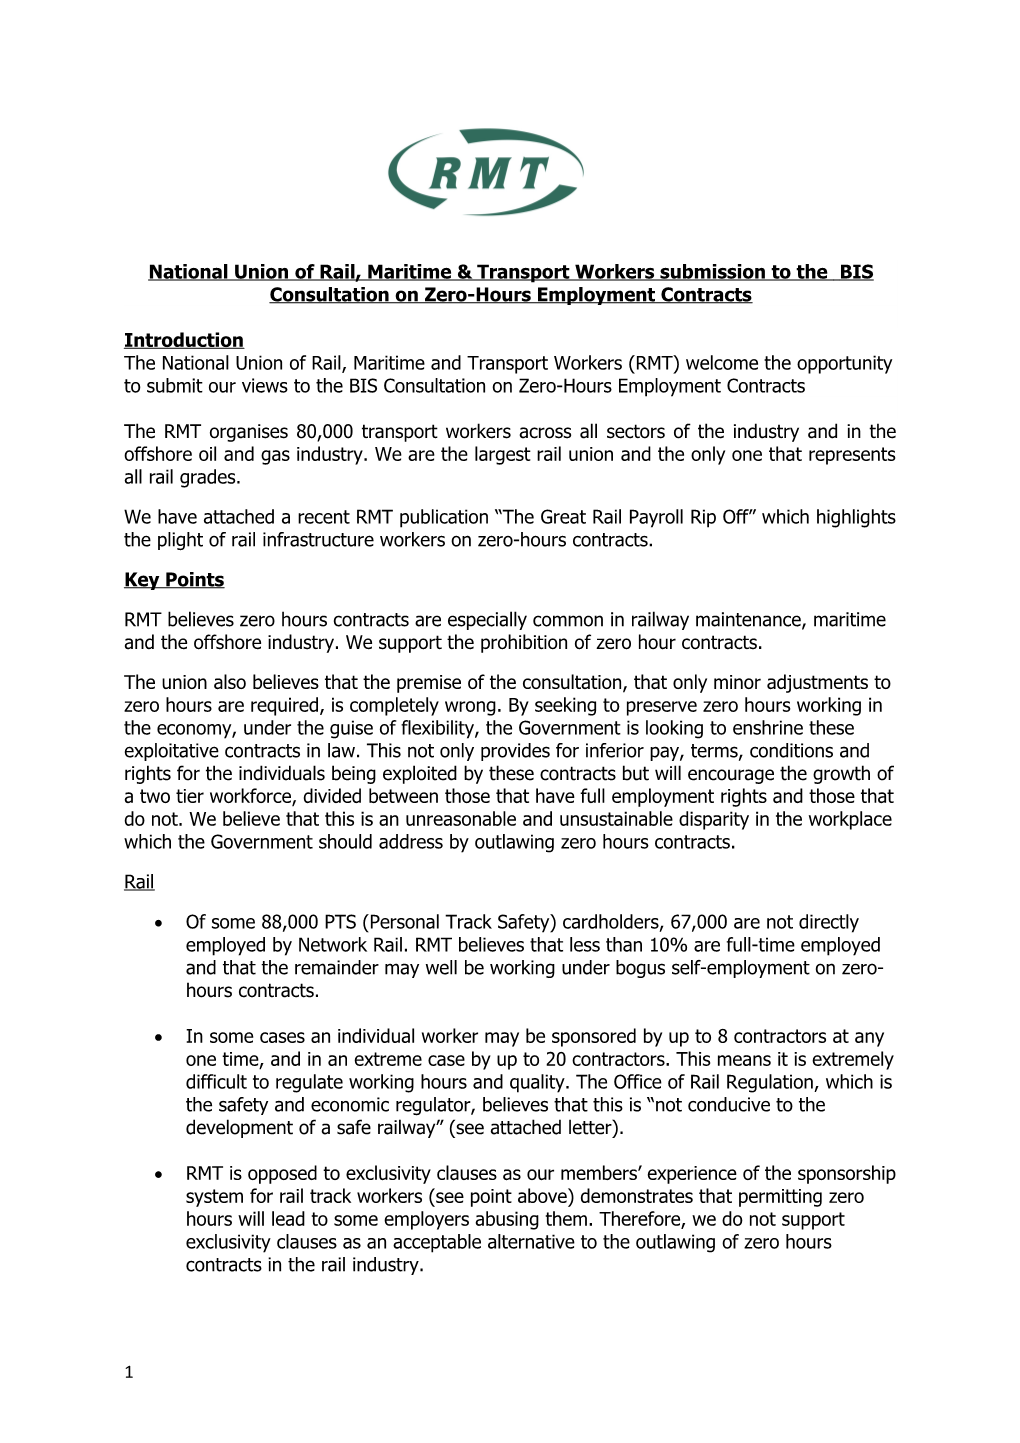 National Union of Rail, Maritime & Transport Workers Submission to the BIS Consultationon